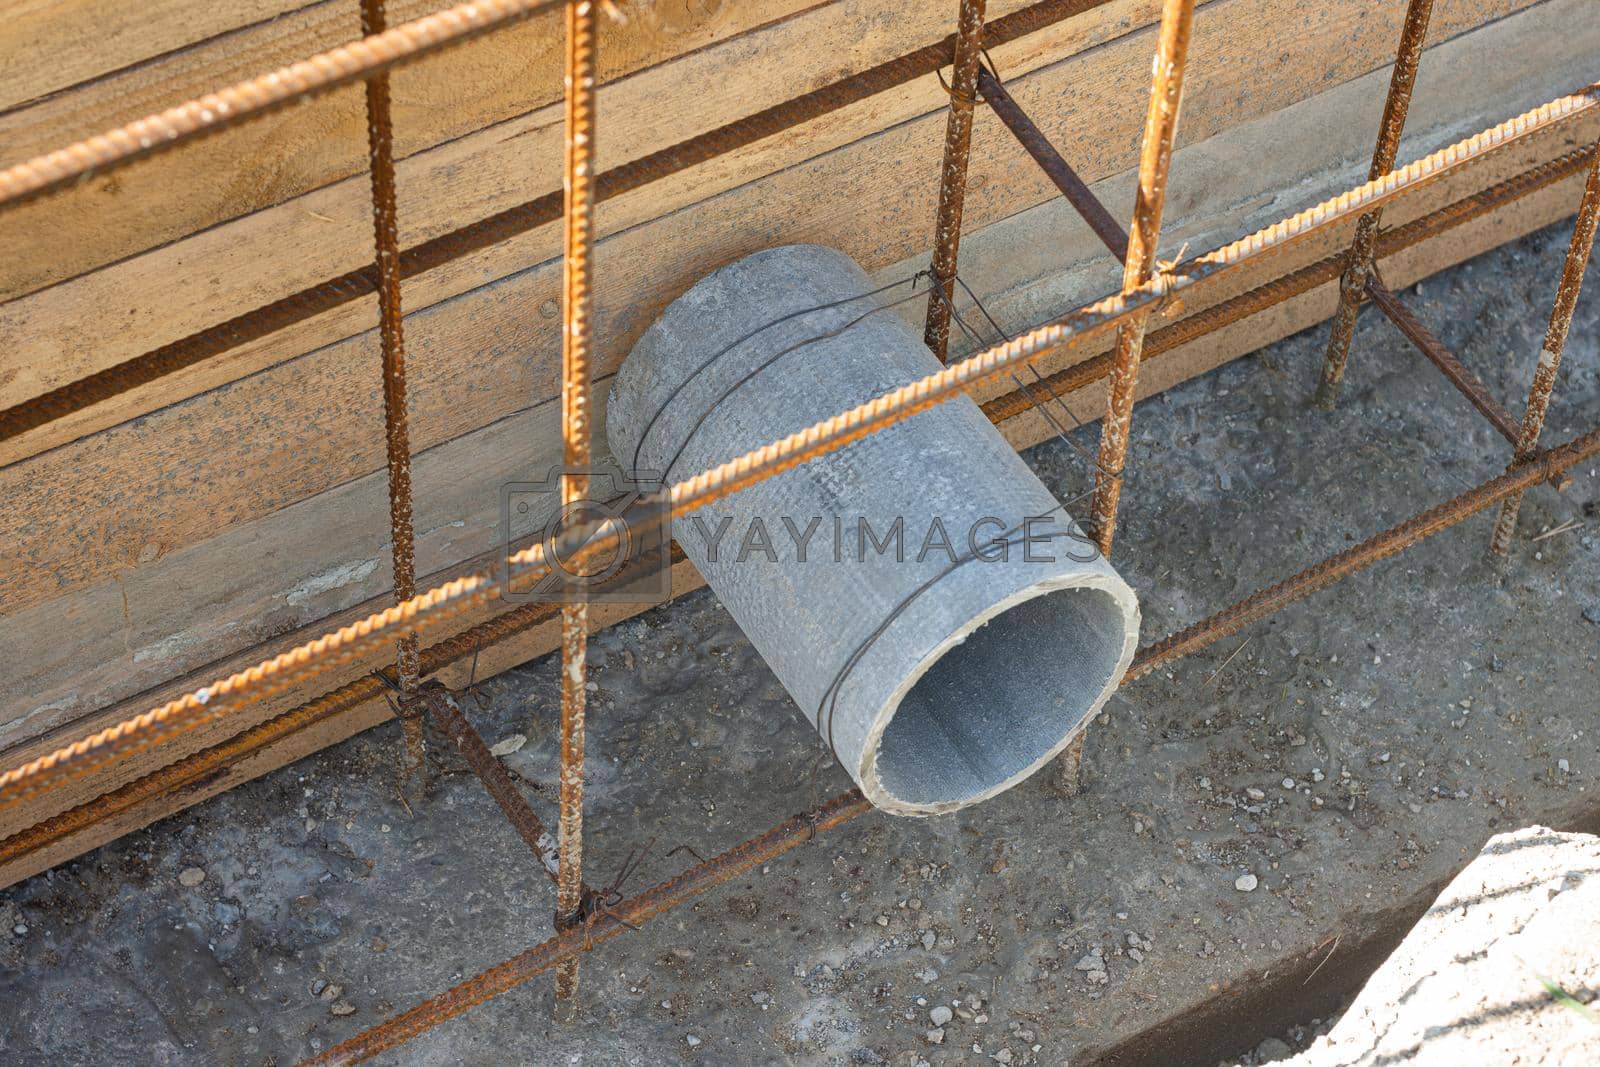 Royalty free image of Laying a sleeve for communications during the construction of a strip foundation by Madhourse